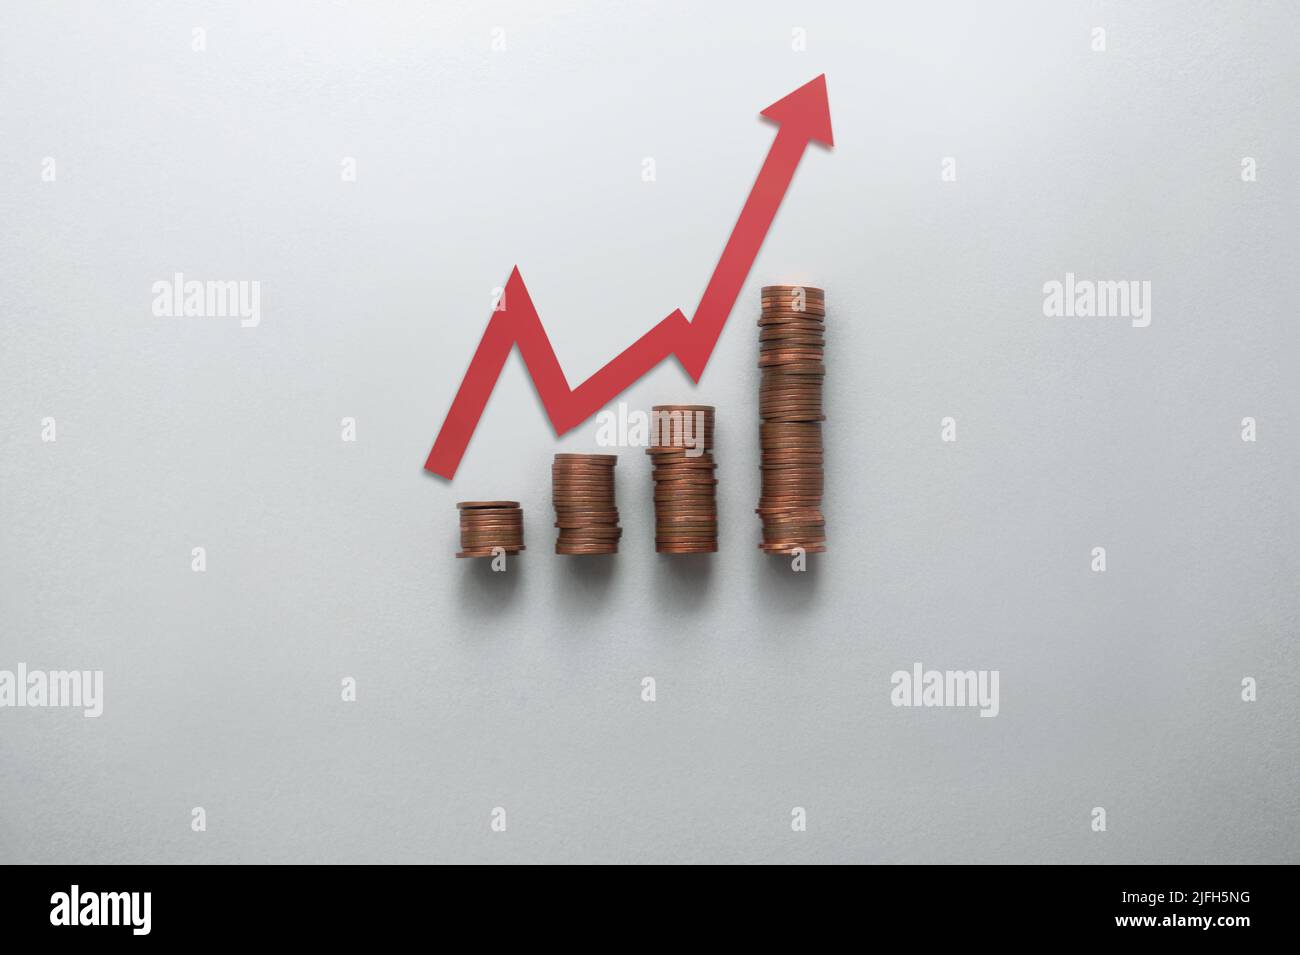 Increasing inflation, costs and prices concept, business chart stacks of coins with arrow moving upwards Stock Photo